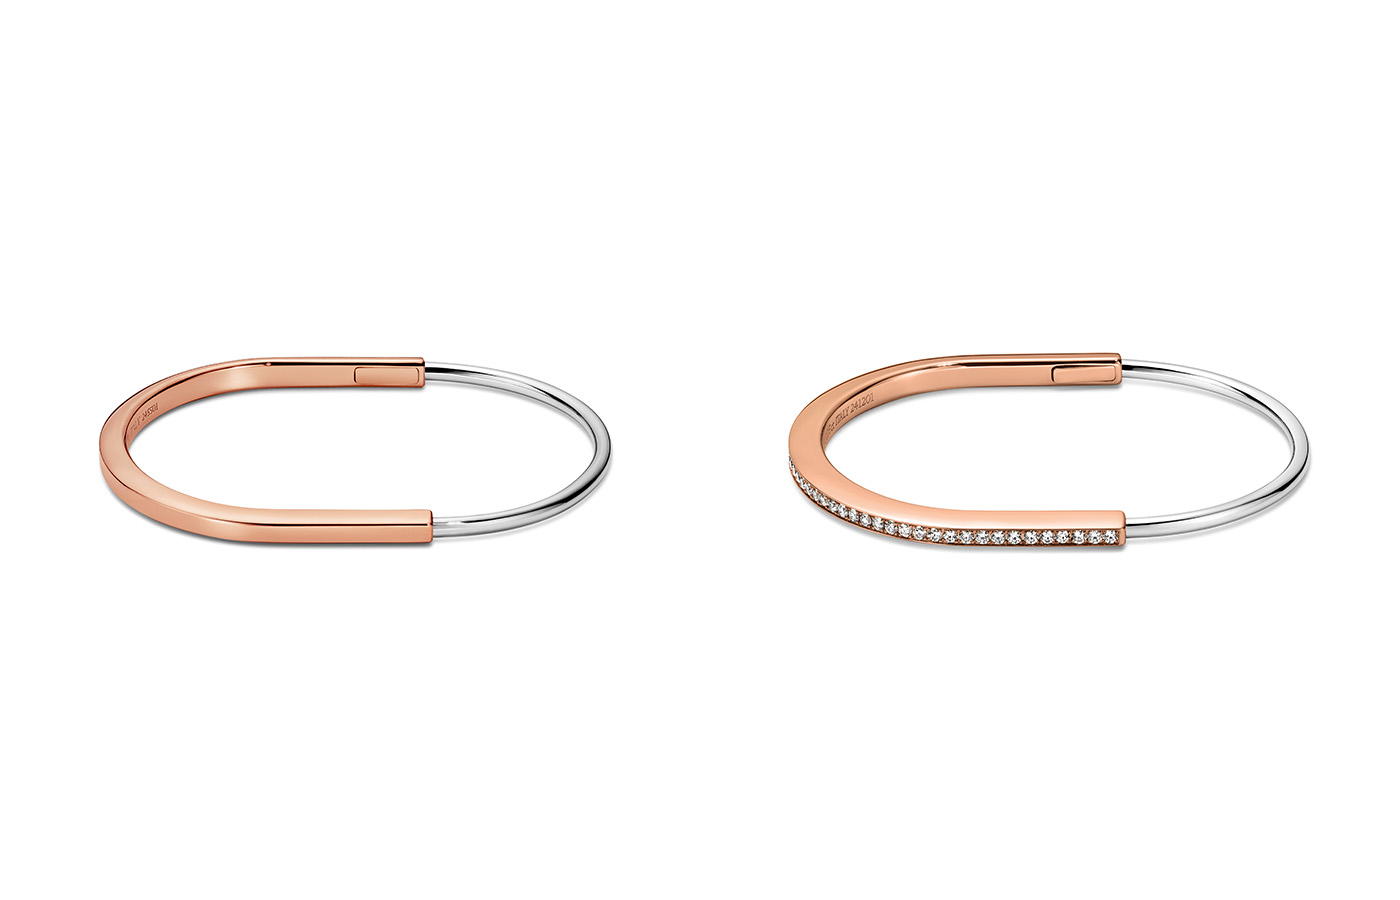 Tiffany & Co. Expands Its Iconic Tiffany Lock Collection